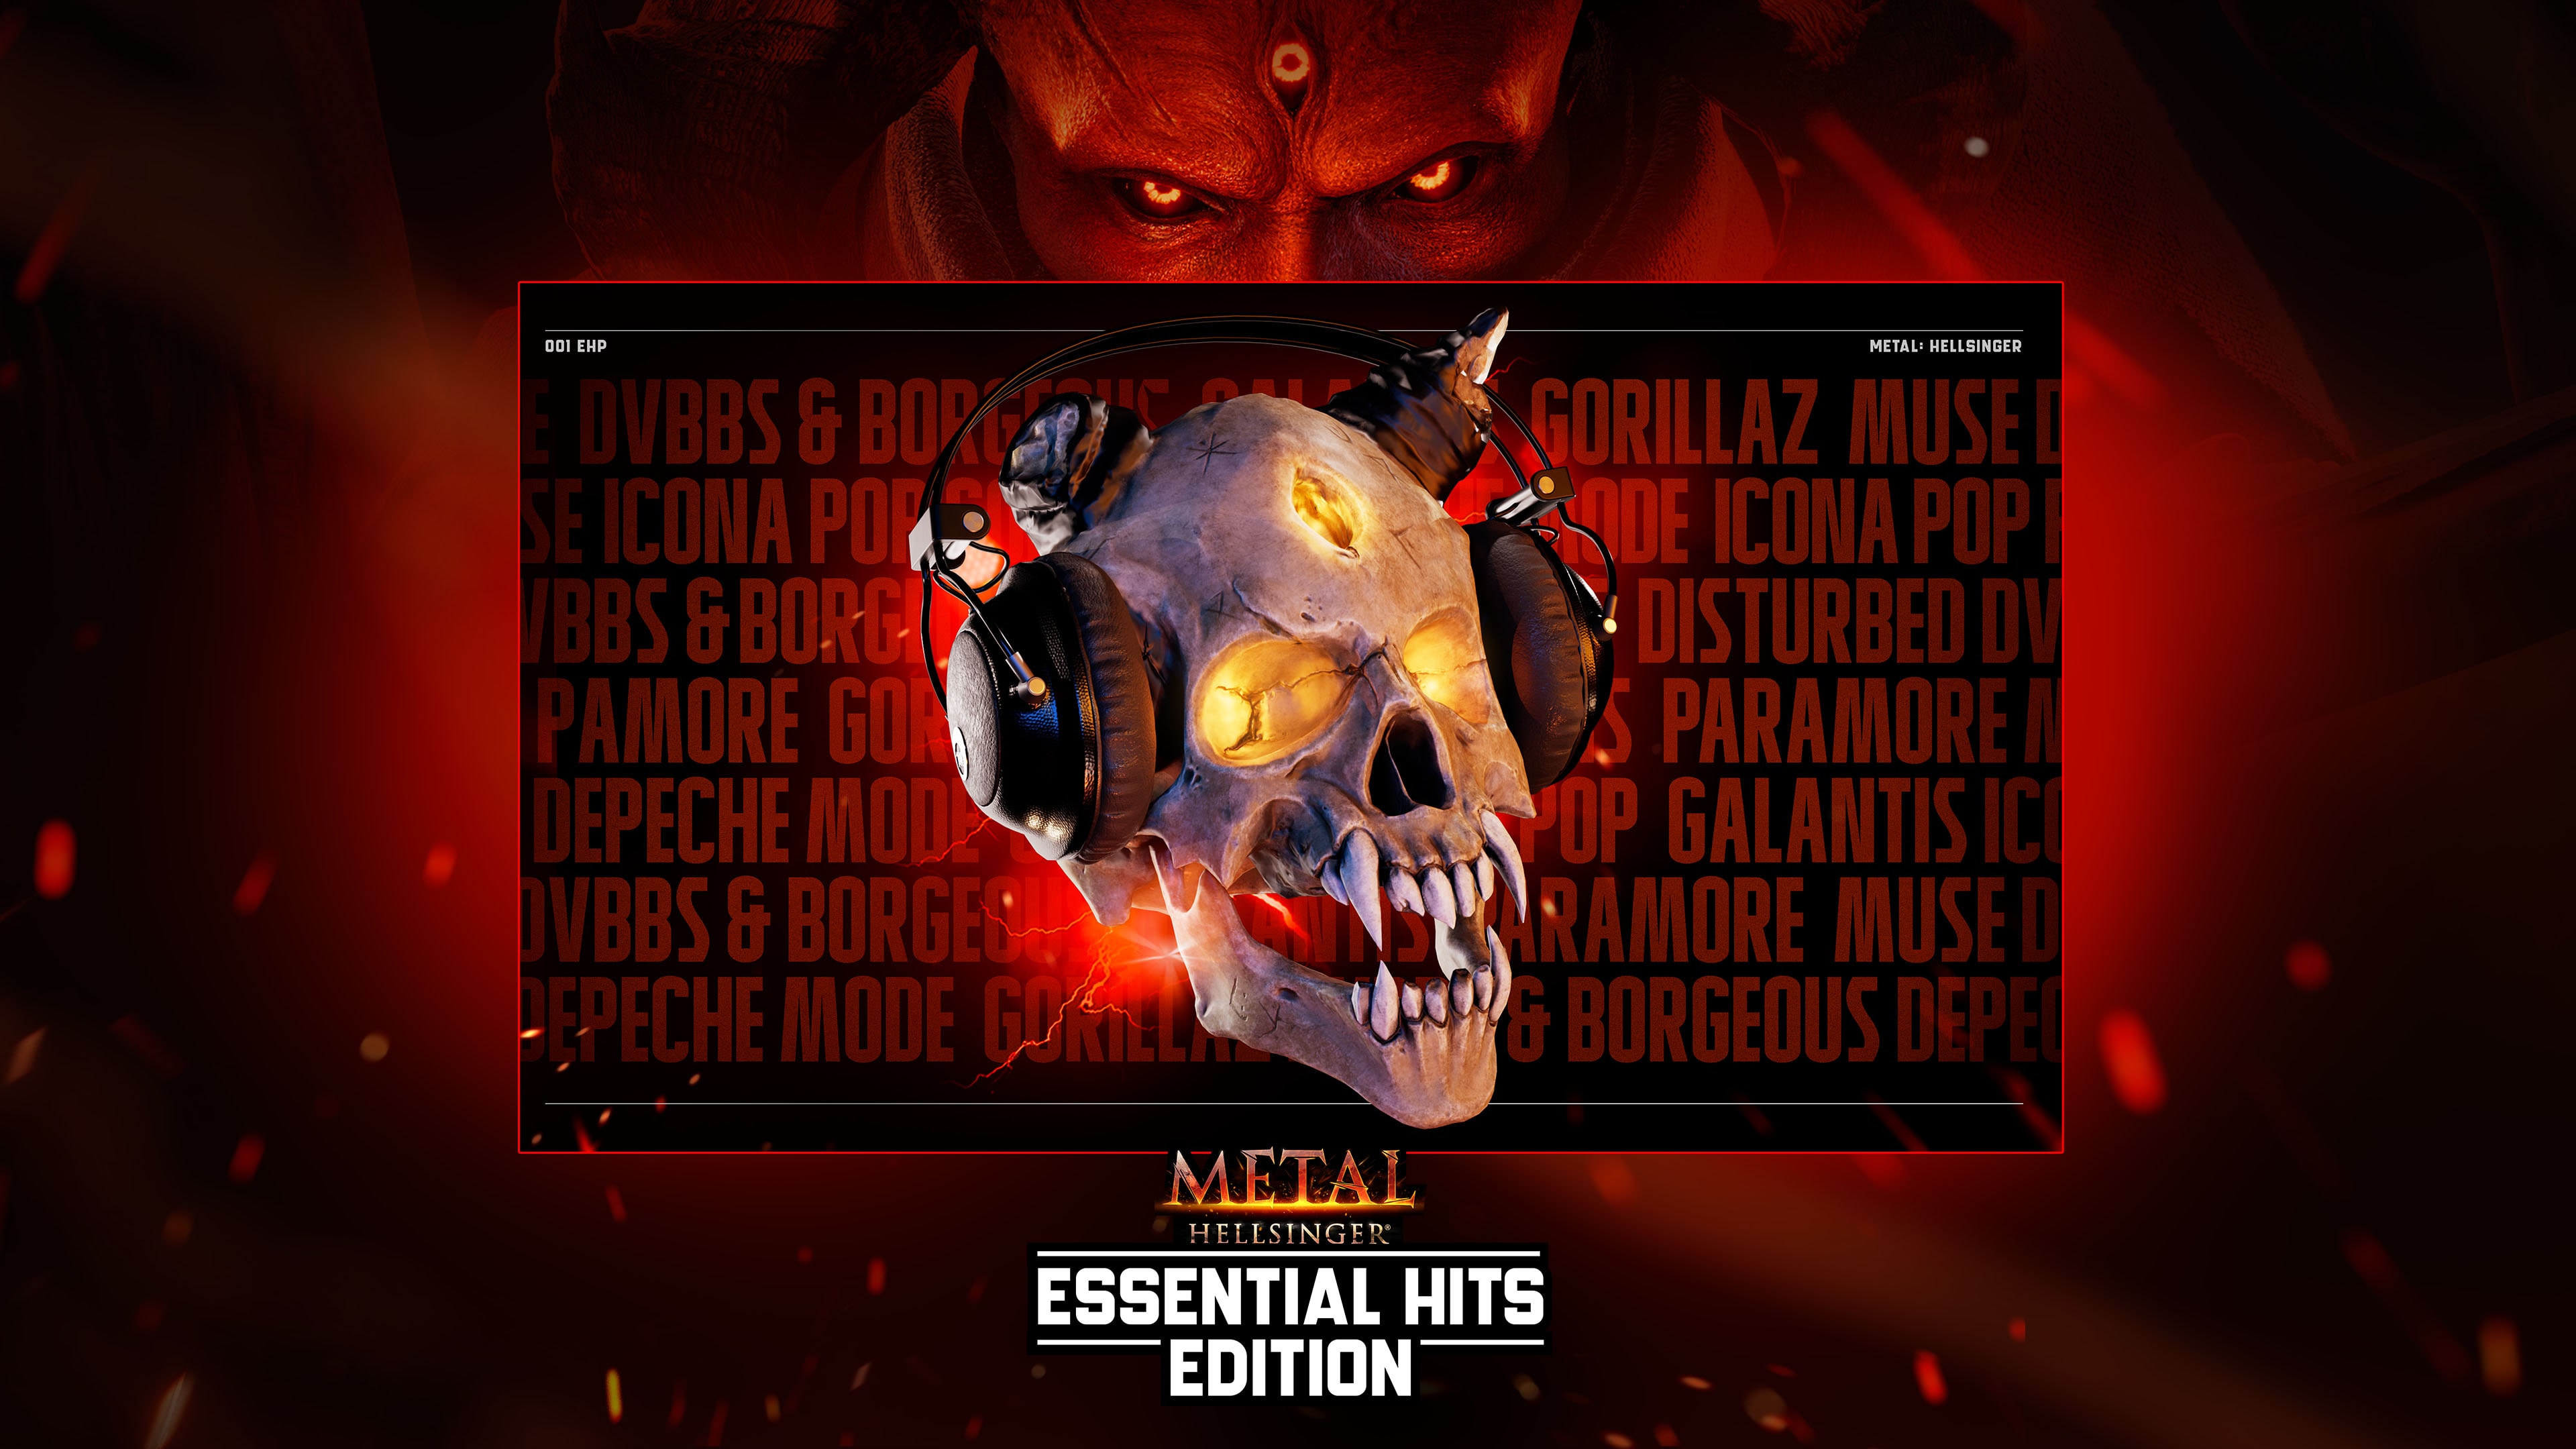 Essential Hits Edition